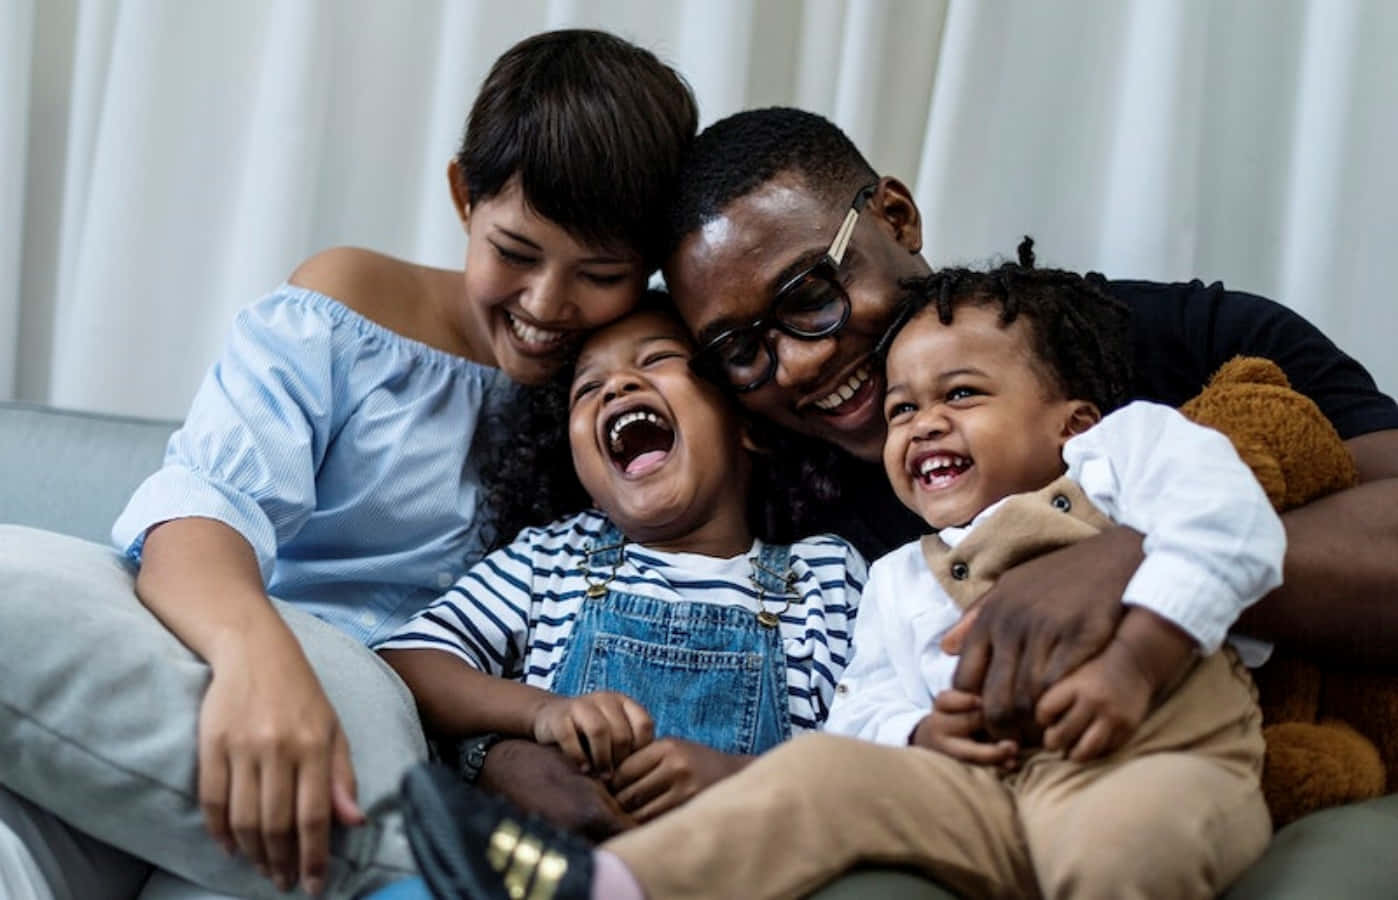 "Love is the foundation that binds this beautiful Black family"